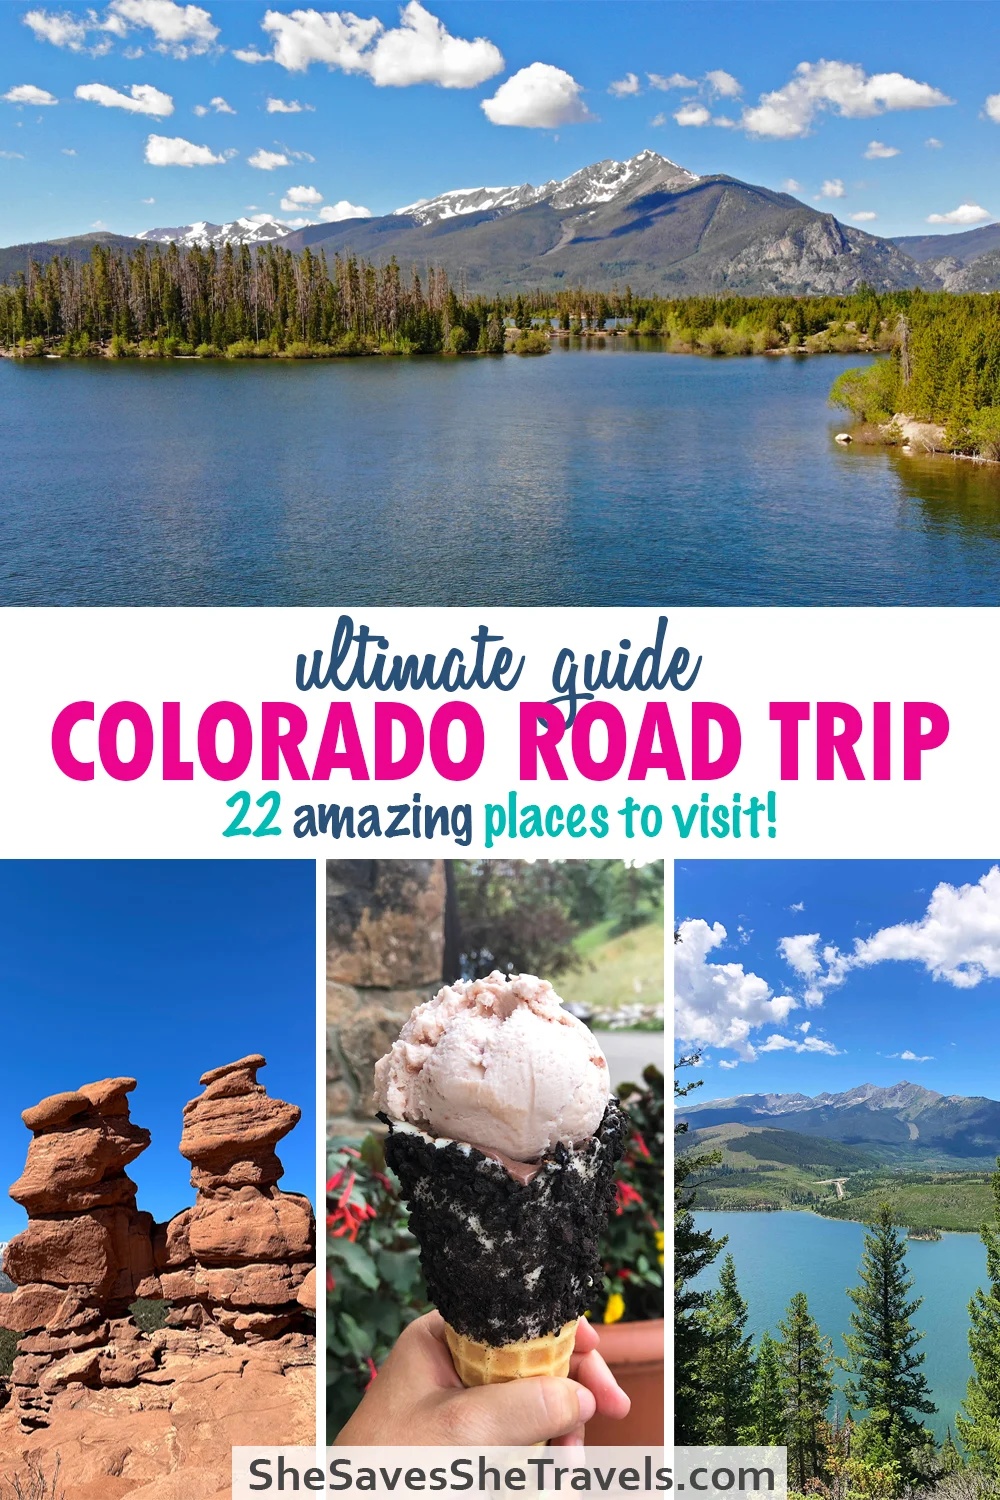 ultimate guide Colorado road trip 22 amazing places to visit with mountain photos, rock structure and ice cream cone